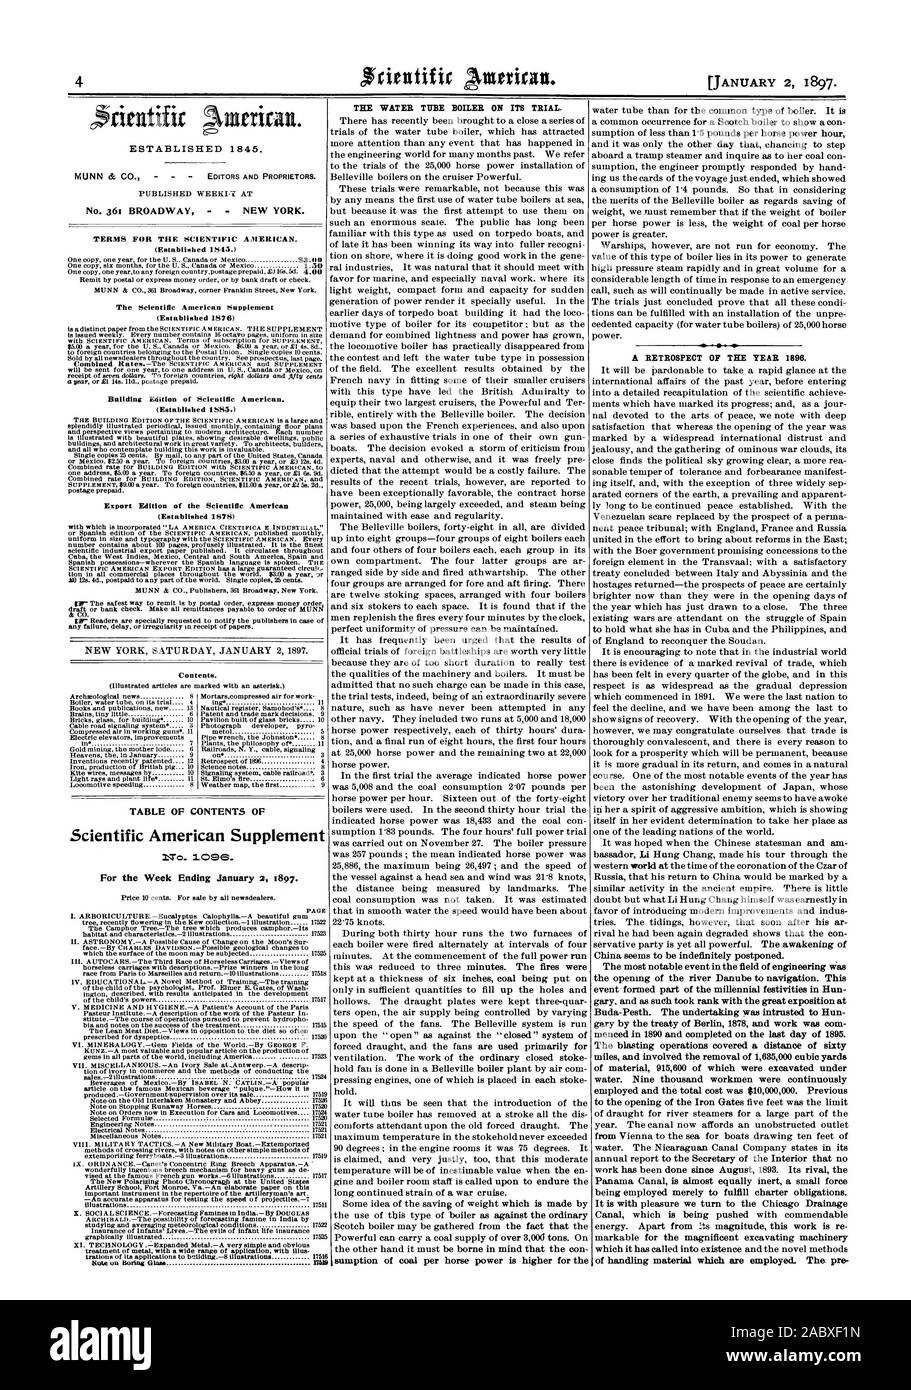 TABLE OF CONTENTS OF Scientific American Supplement 1 To. 1096. A RETROSPECT OF THE YEAR 1898., 1897-01-02 Stock Photo